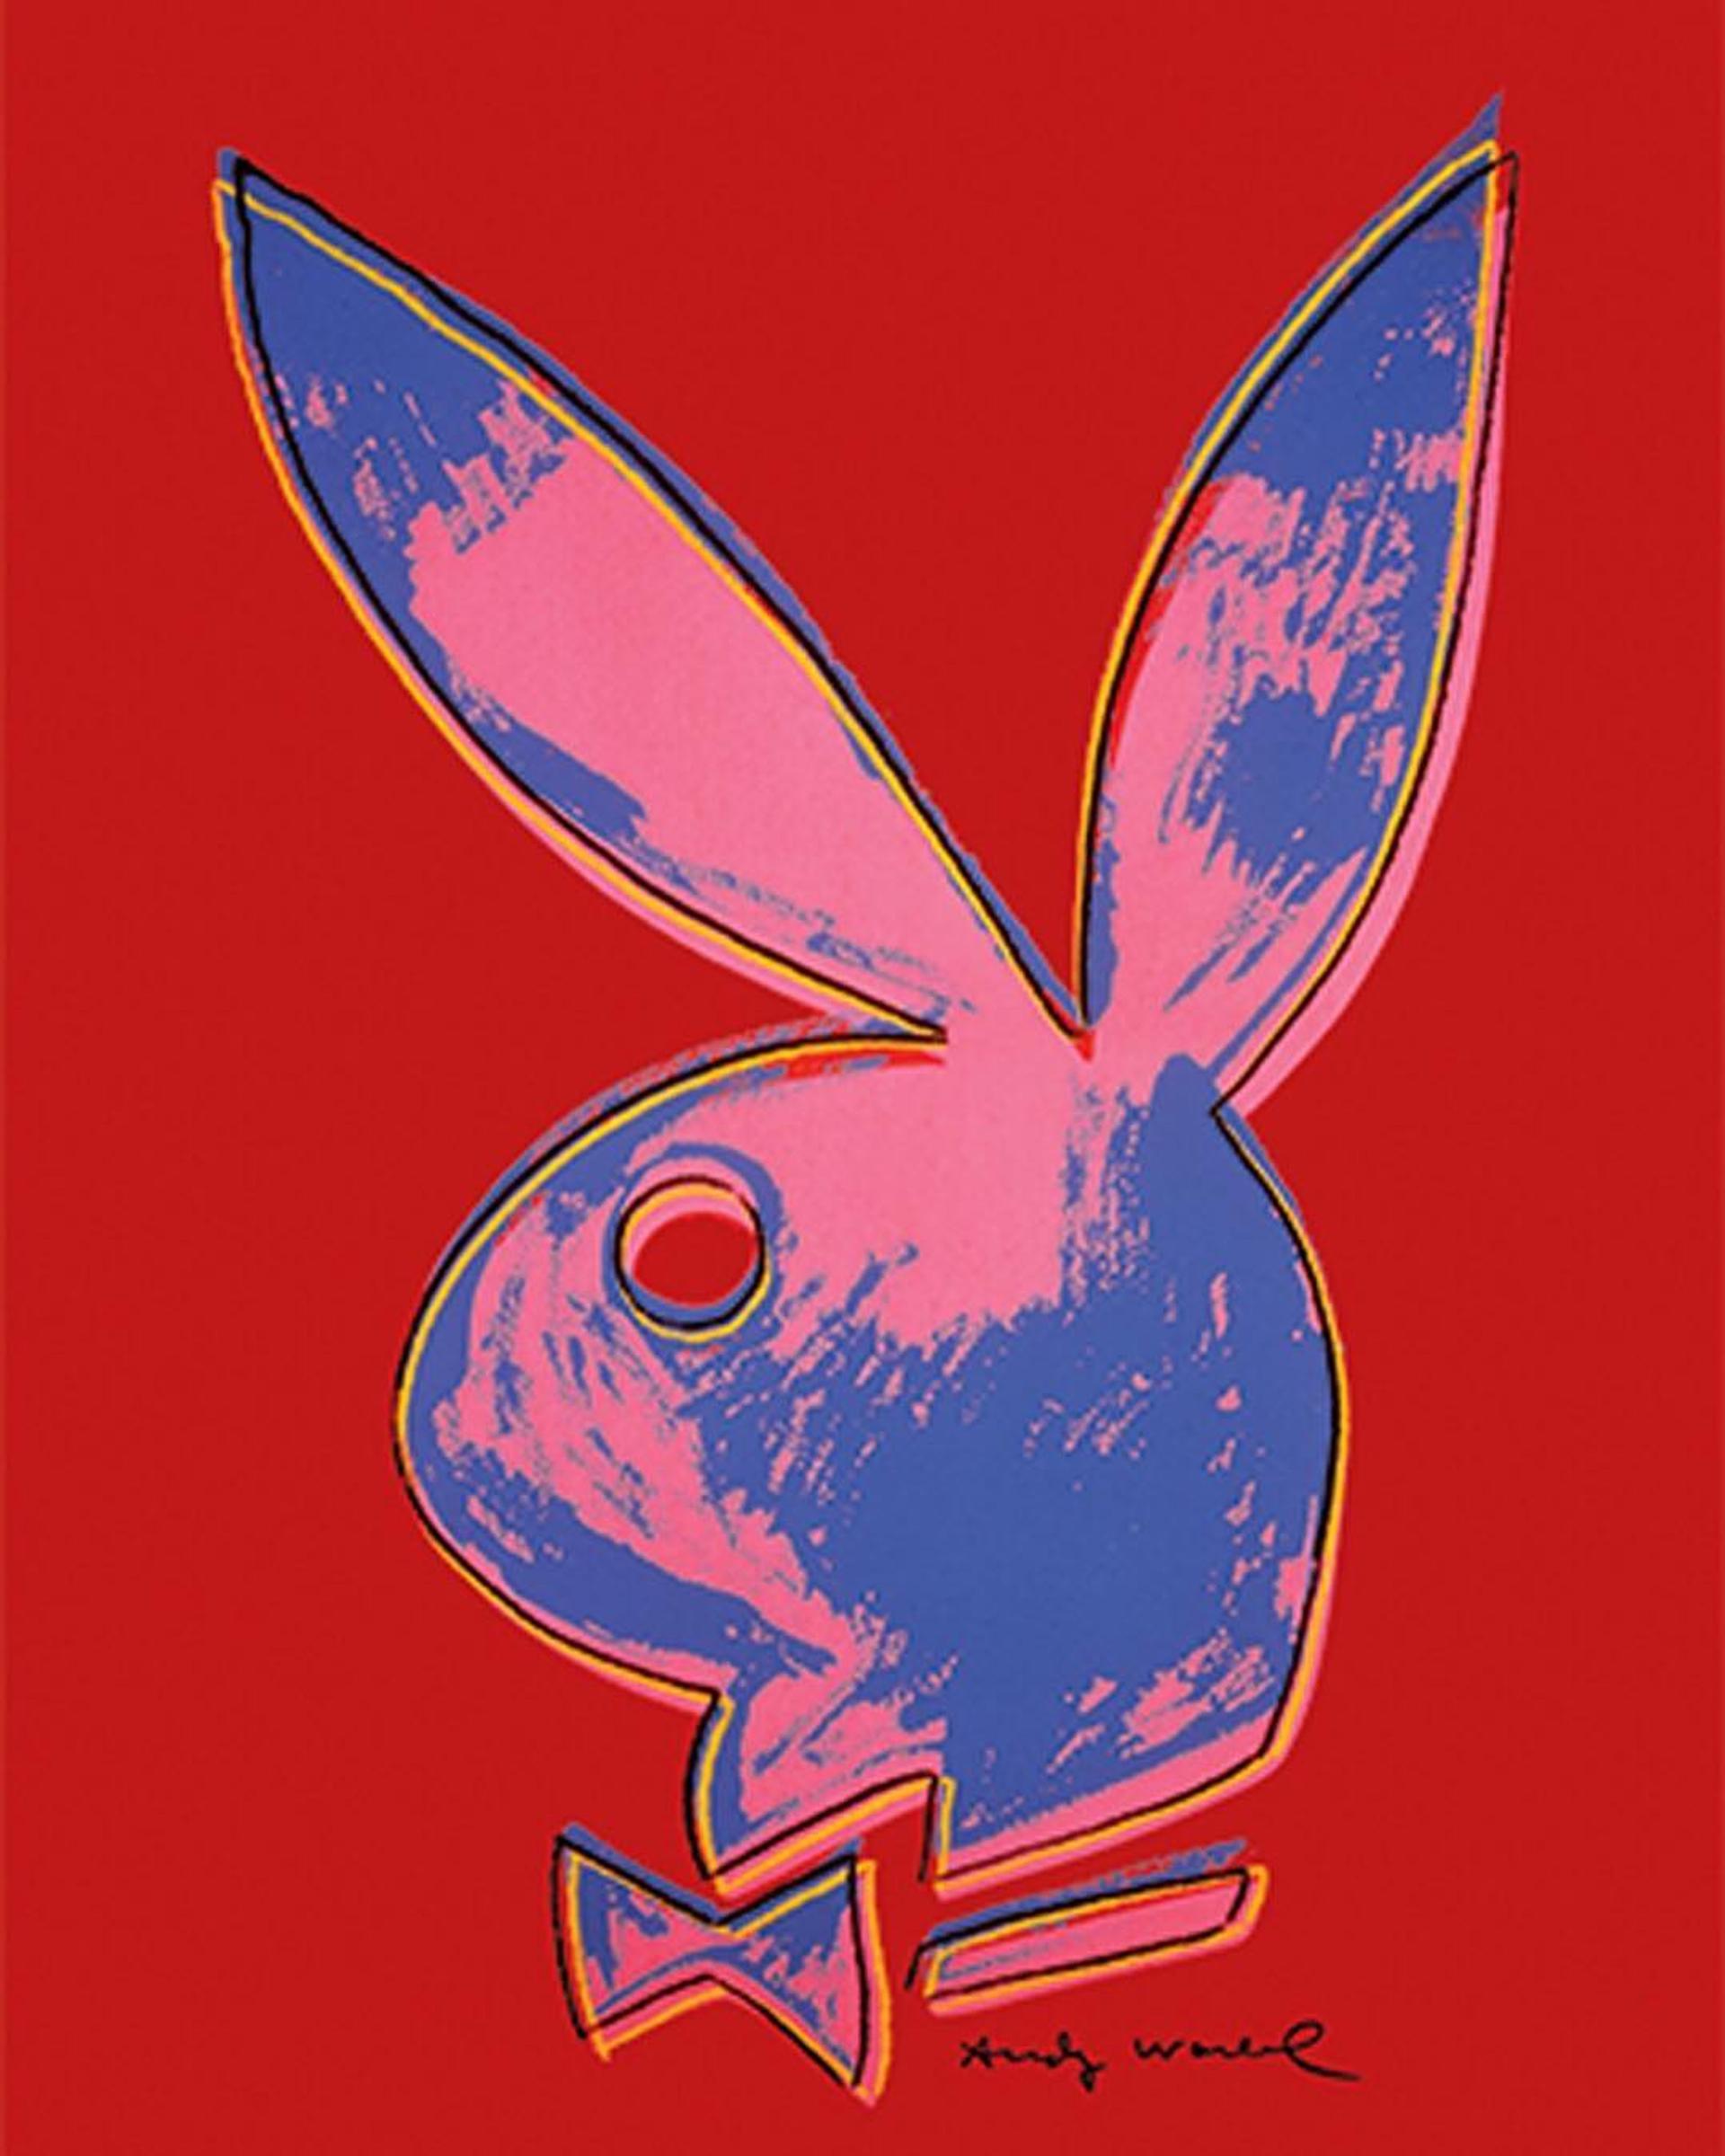 The Play-Doh Bunny: A History of Playboy